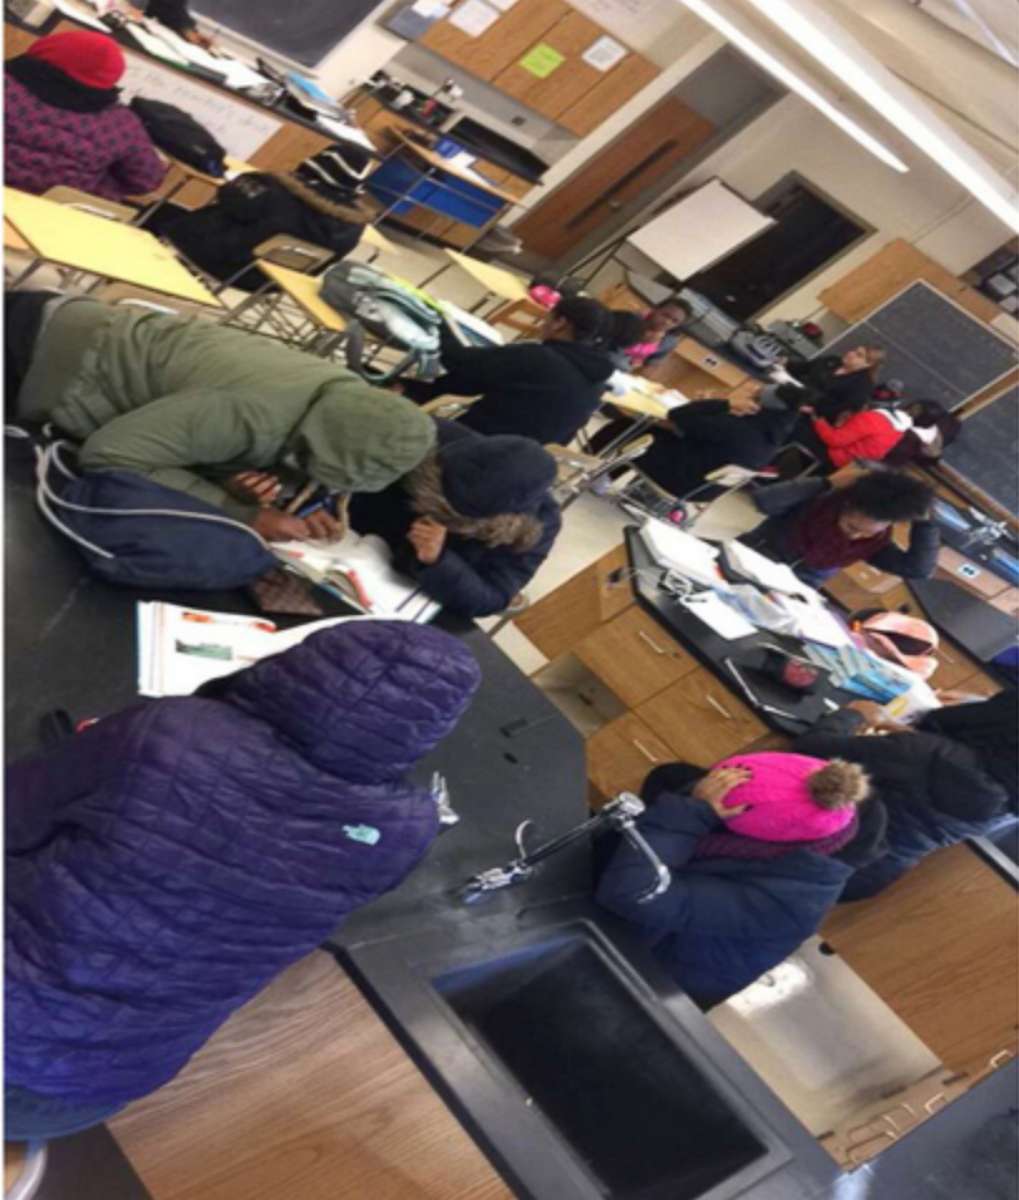 PHOTO: ??@ComedianKhairy tweeted photos on Dec. 13, 2017 showing students at Western High School in Baltimore, Md., in classrooms that have been without heat for over 2 weeks.